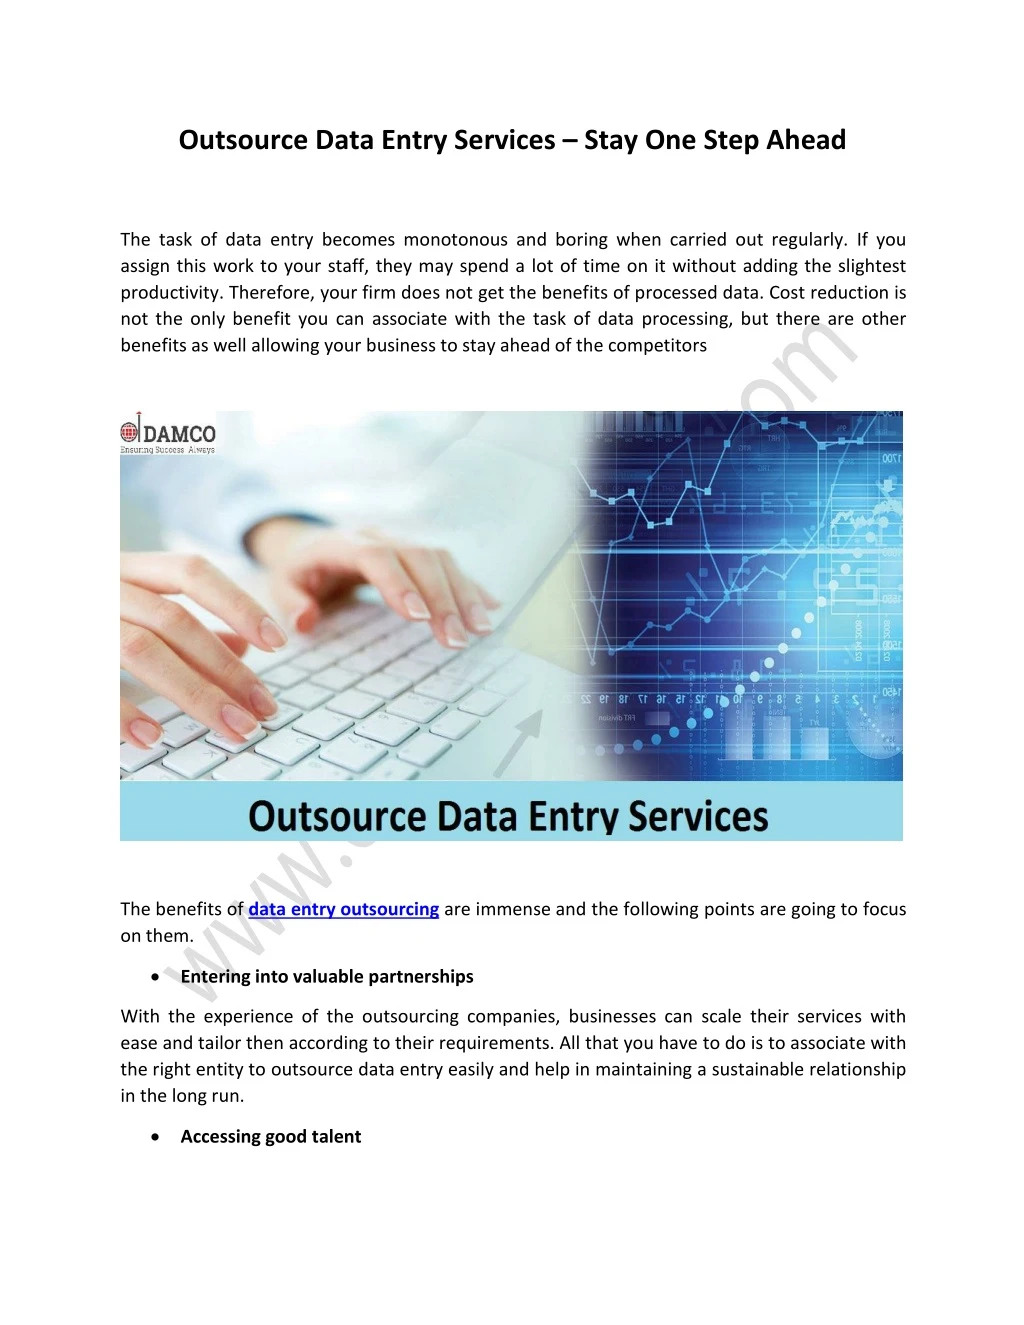 outsource data entry services stay one step ahead